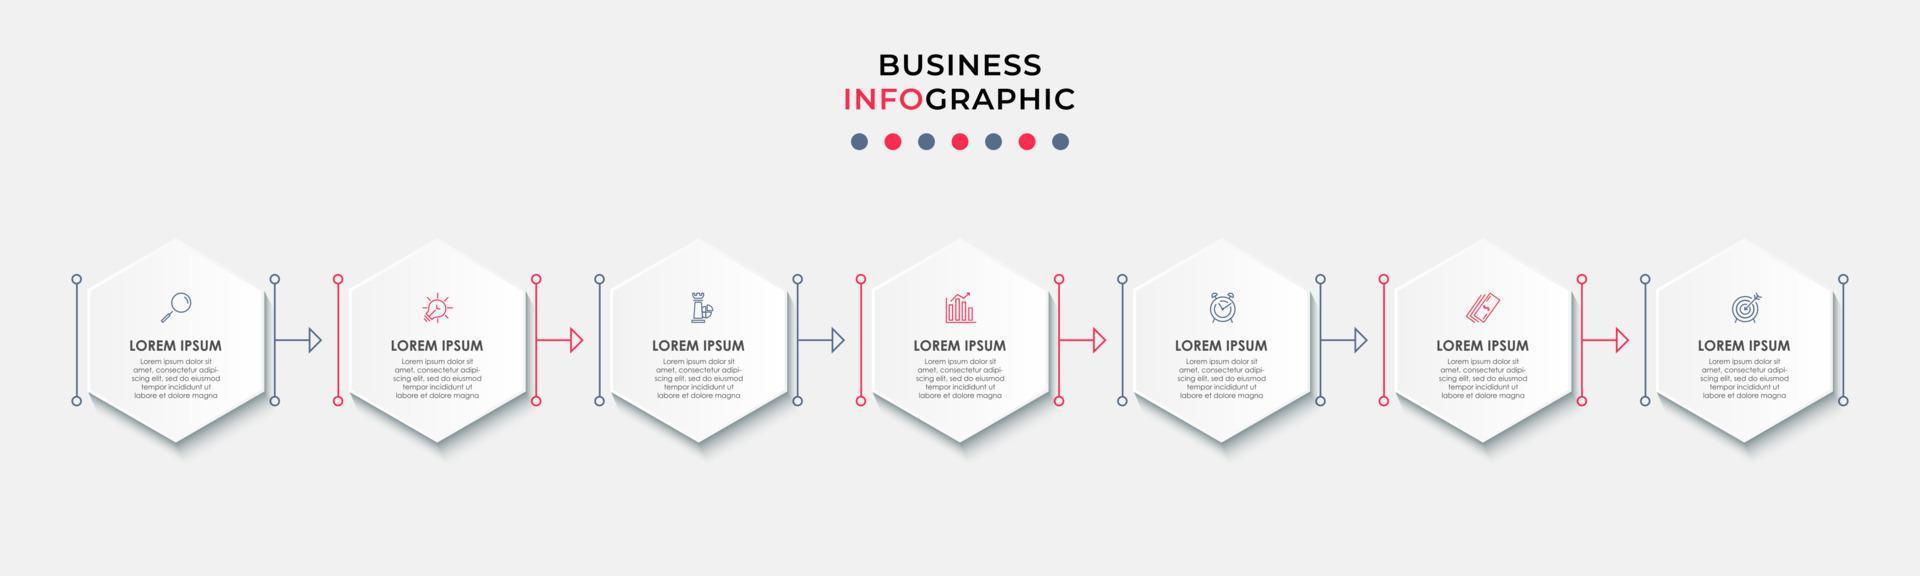 Business Infographic design template Vector with icons and 7 options or steps. Can be used for process diagram, presentations, workflow layout, banner, flow chart, info graph